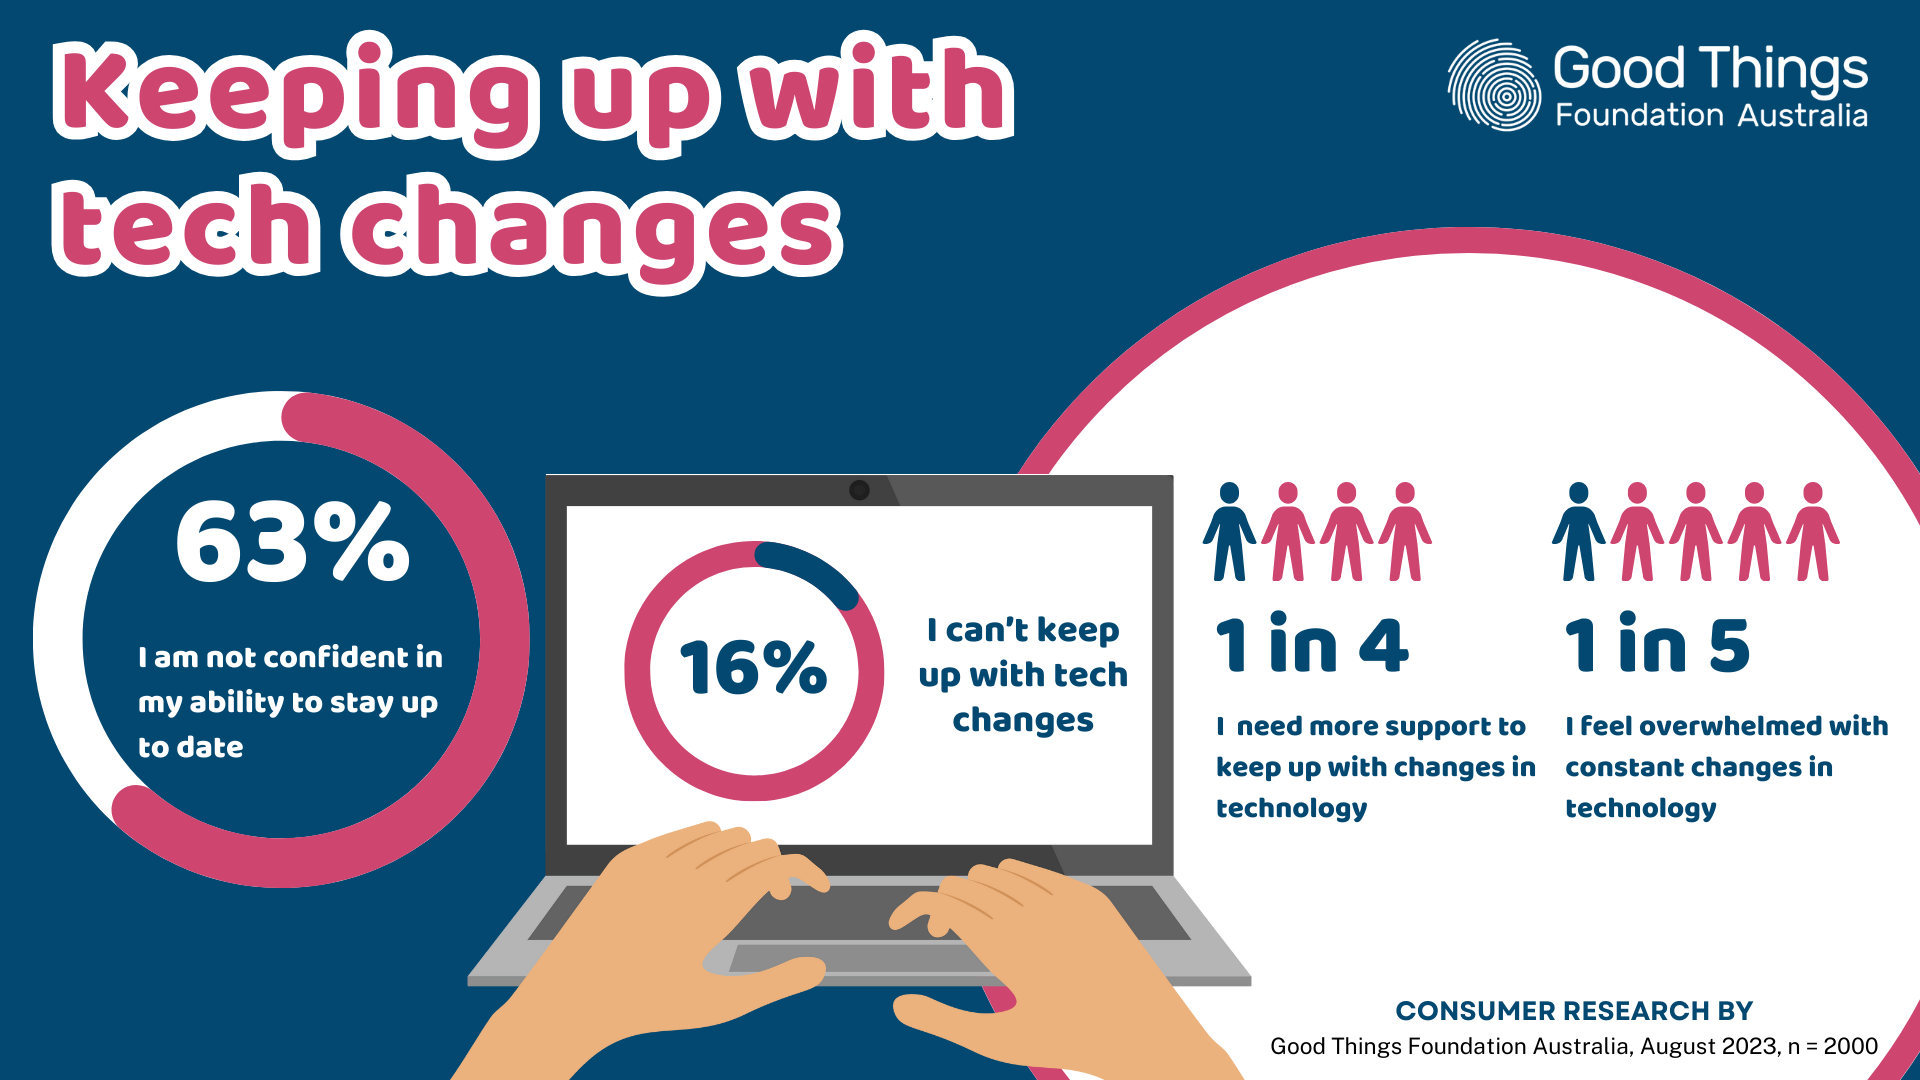 Infographic: Keeping up with tech changes. Illustrates: 63% I am not confident in my ability to stay up to date 16% I can’t keep up with tech changes 1 in 4 I need more support to keep up with changes in technology 1 in 5 I feel overwhelmed with constant changes in technology